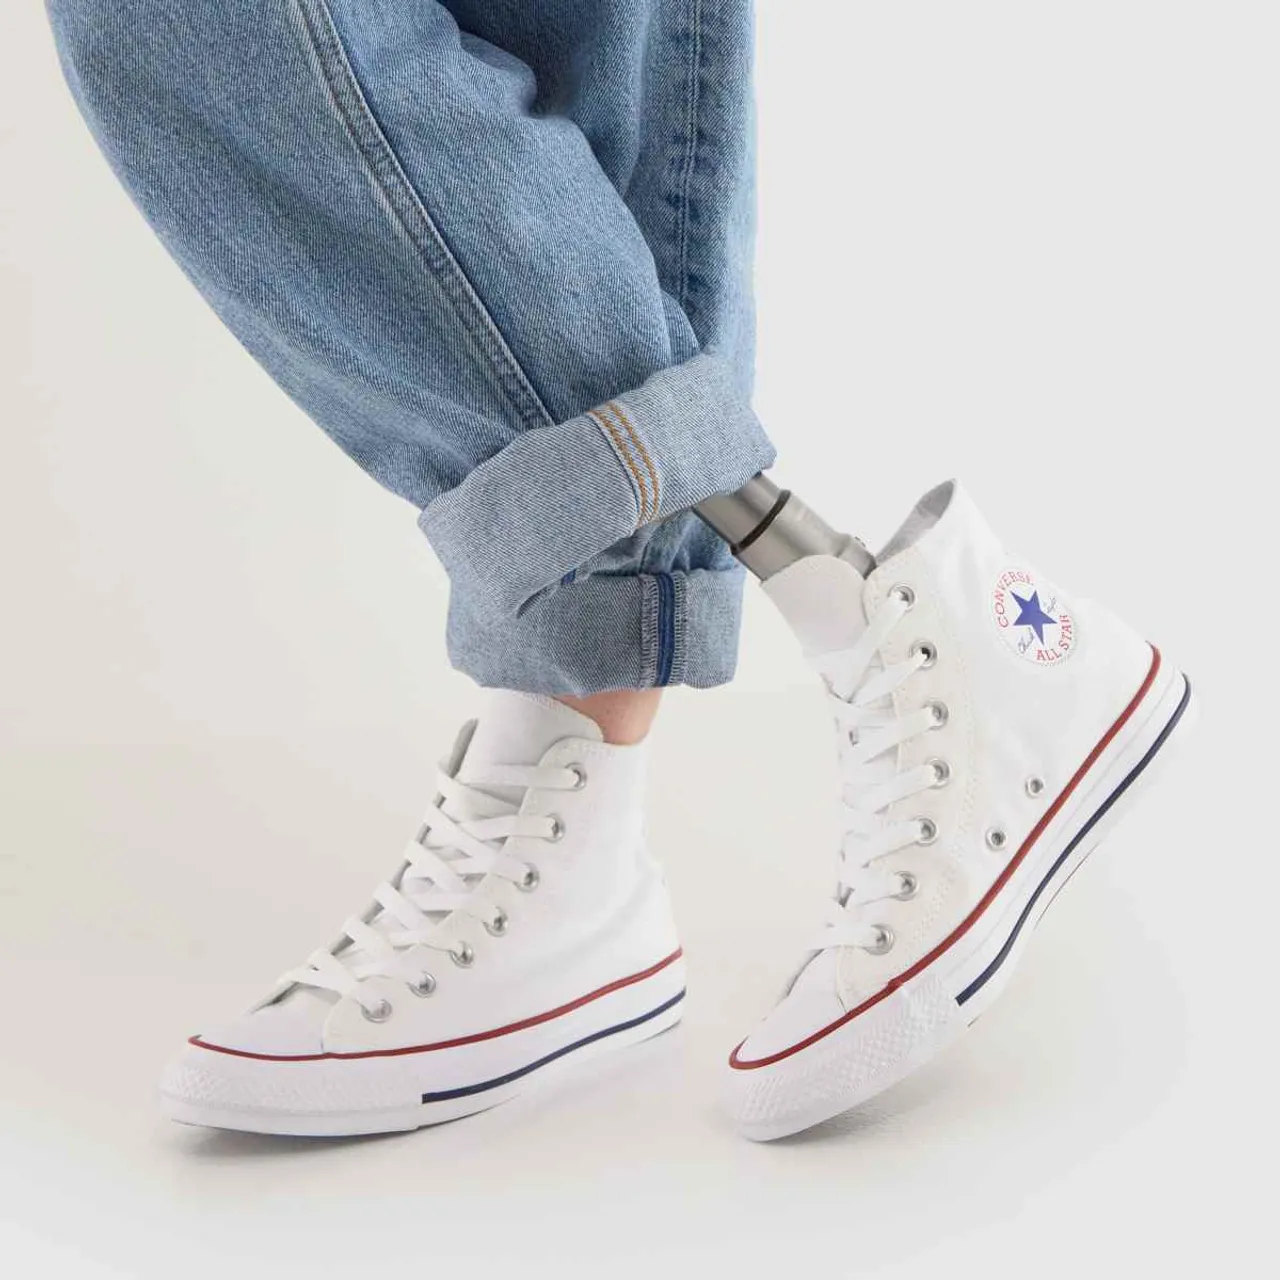 Converse All Star Hi Trainers In White